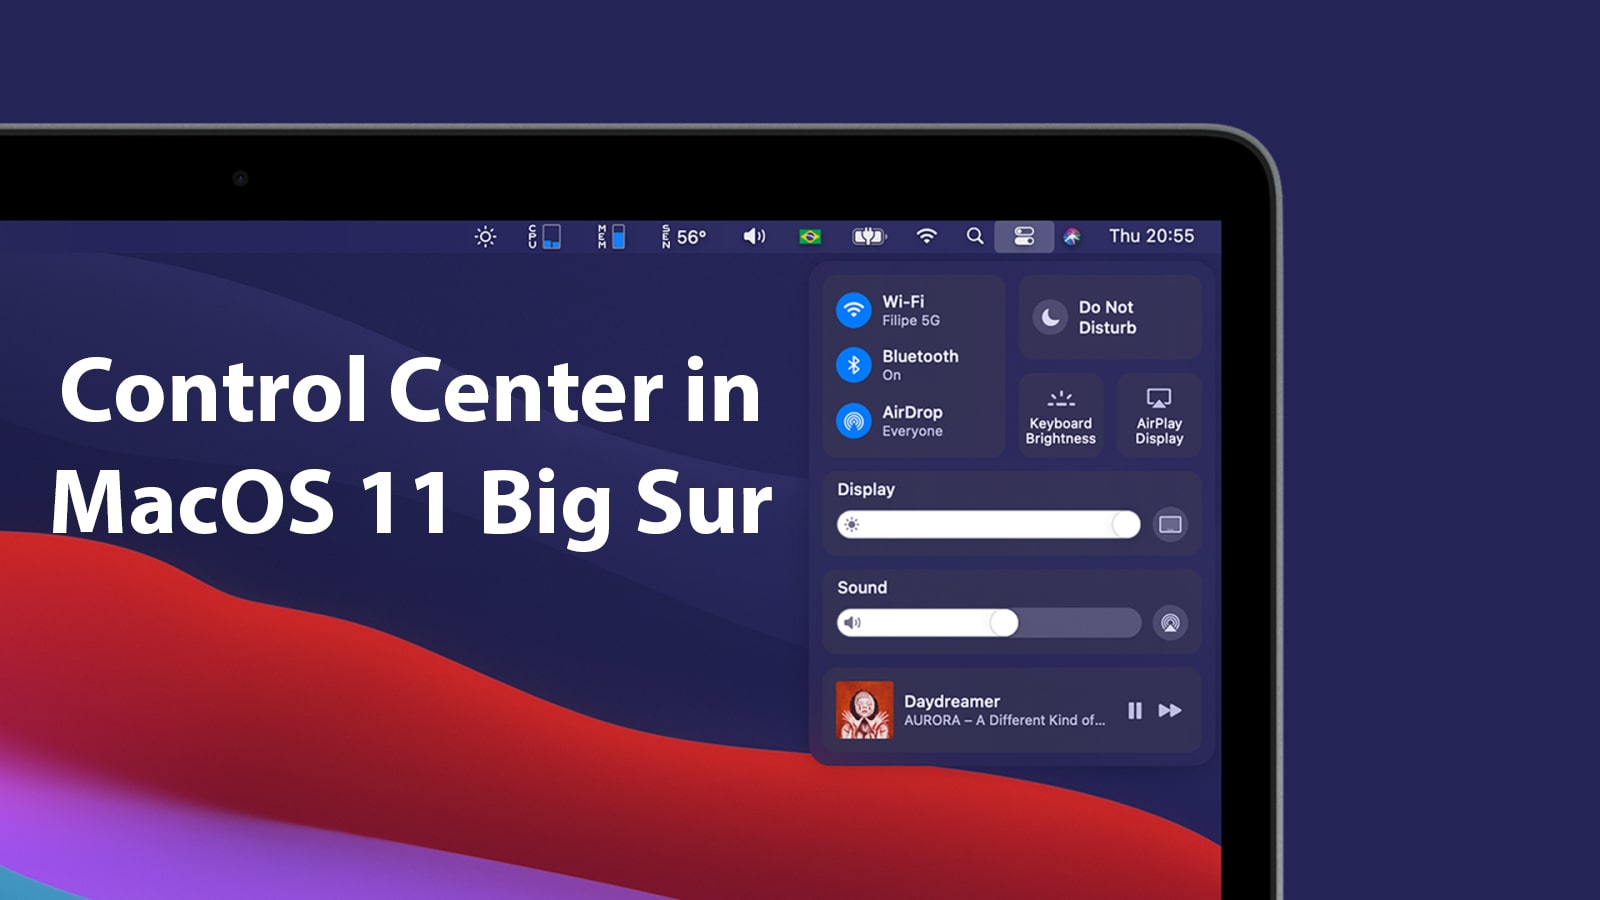 How to Customize Control Center Items in macOS 11 Big Sur?